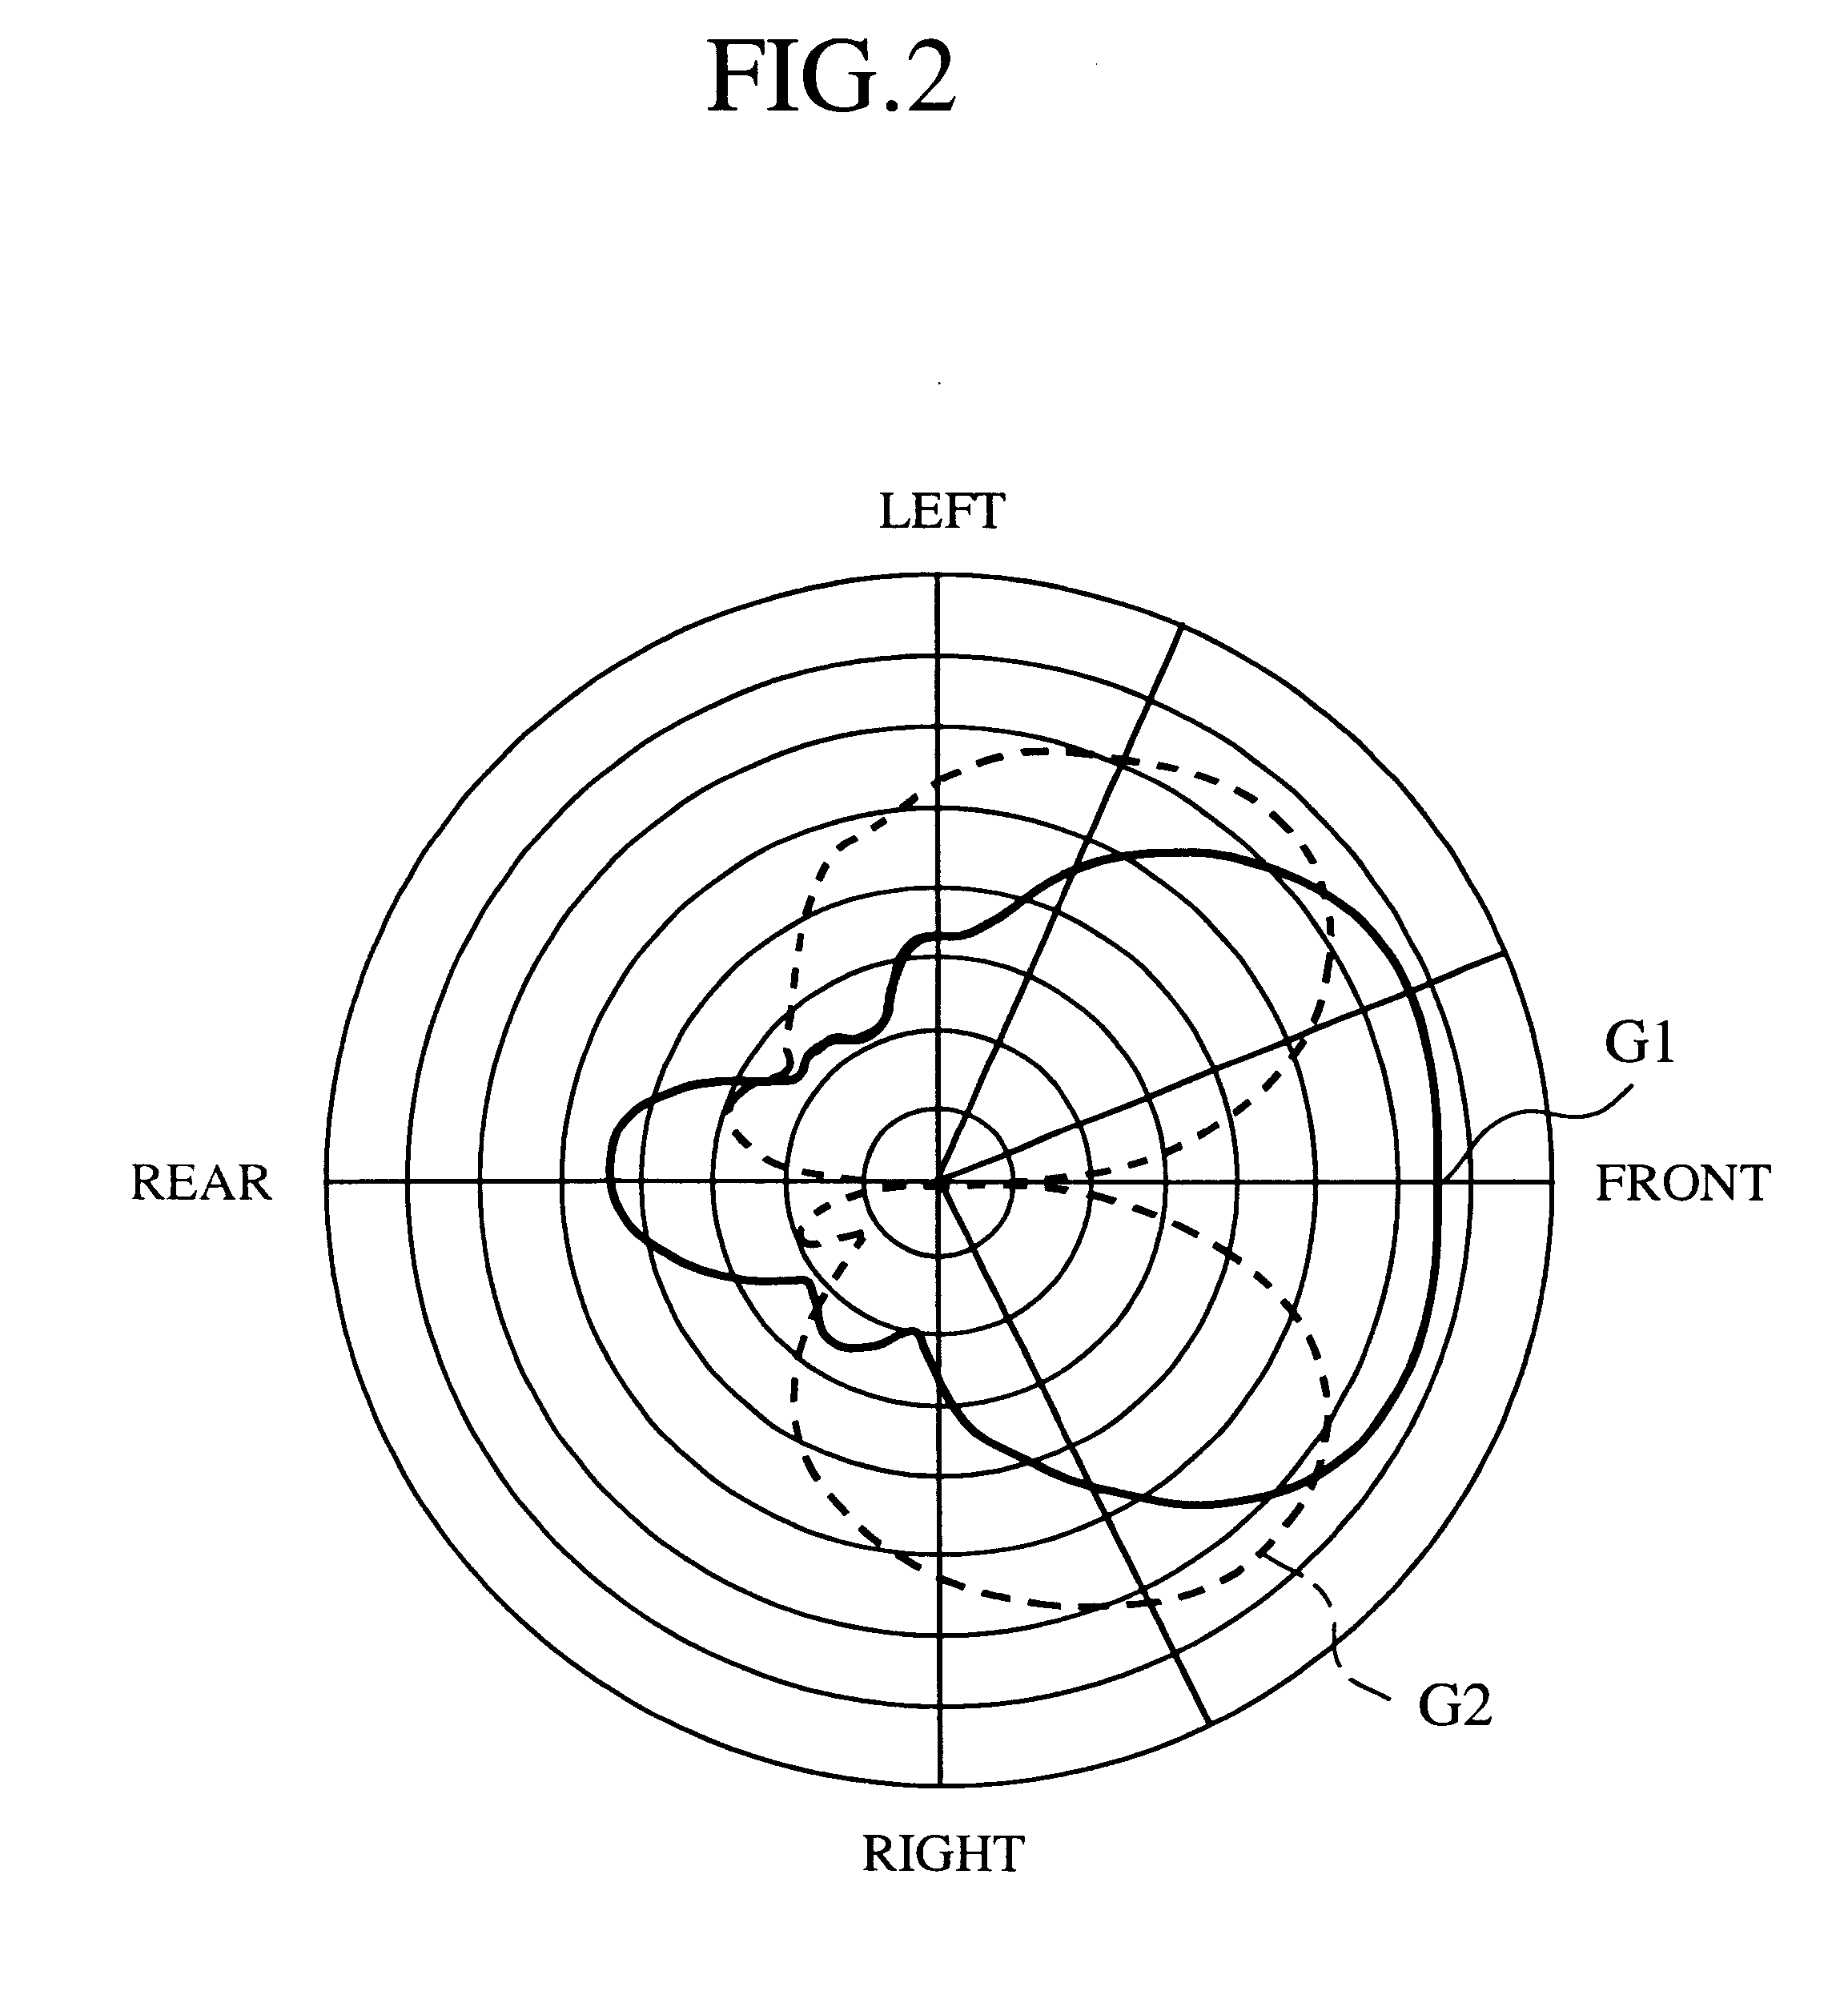 Patch antenna array with isolated elements